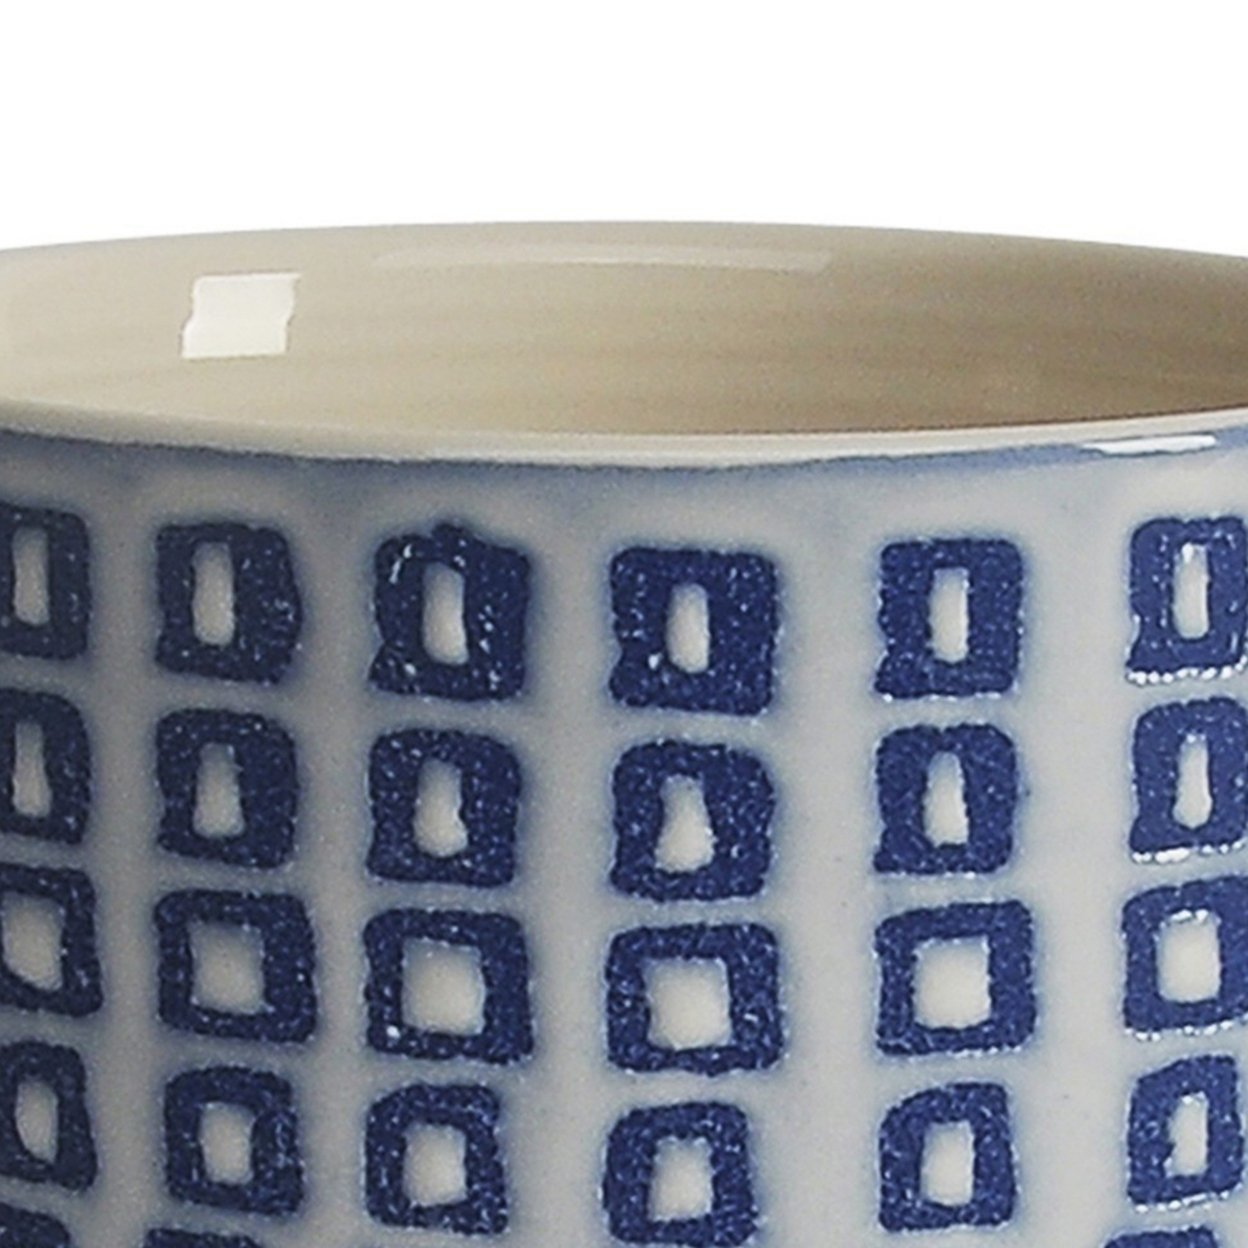 Ceramic Planter With Saucer And Square Pattern, White And Blue, Saltoro Sherpi